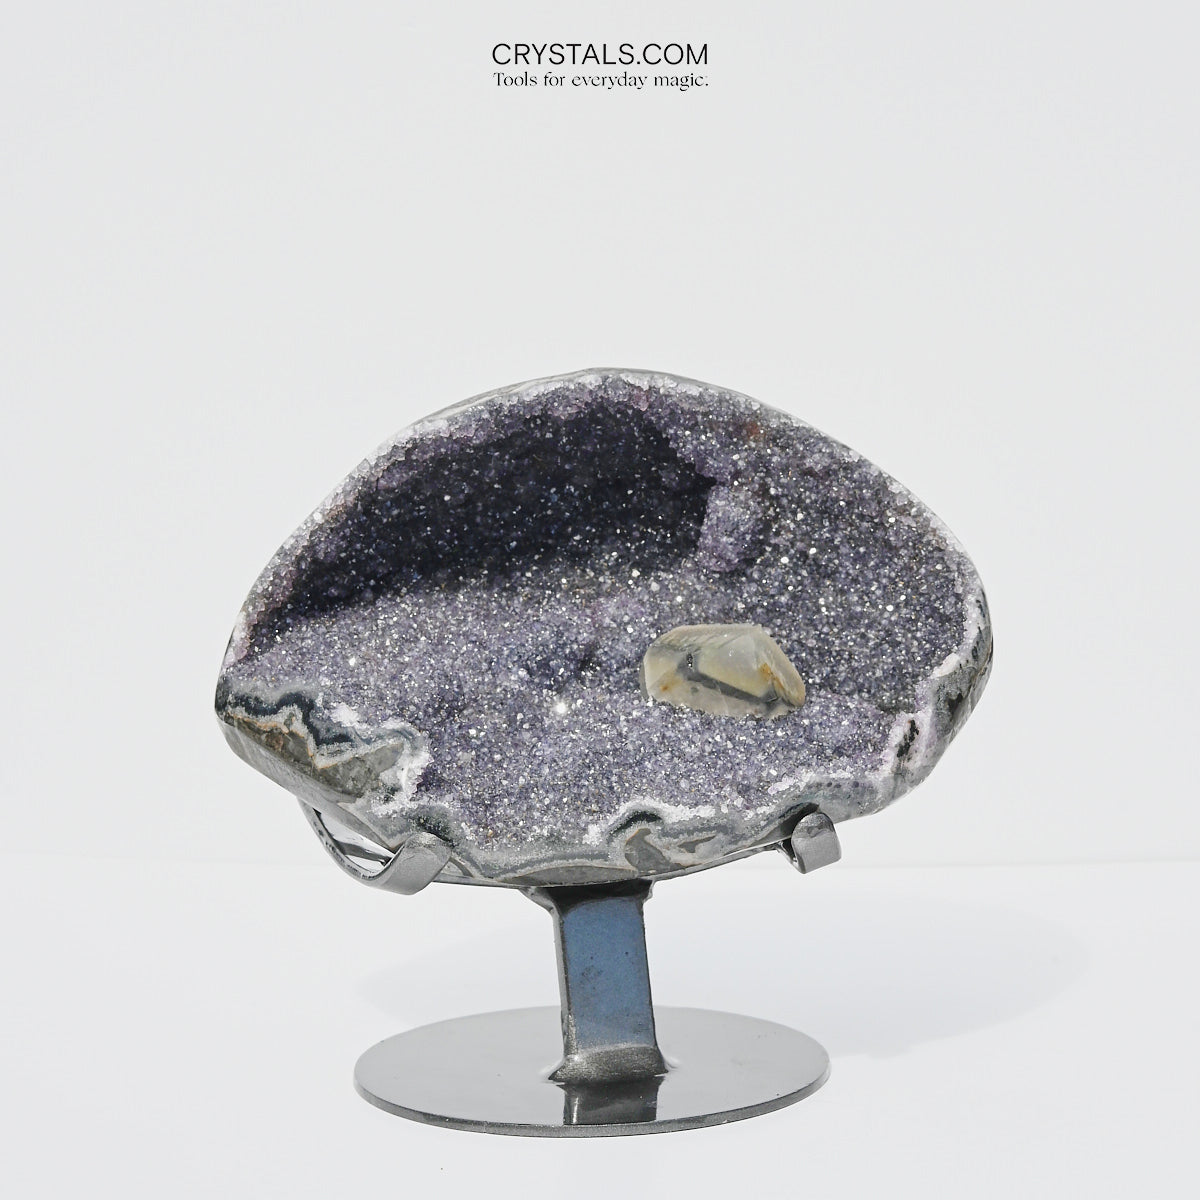 Amethyst w/ Calcite Geode on Stand 9 inch